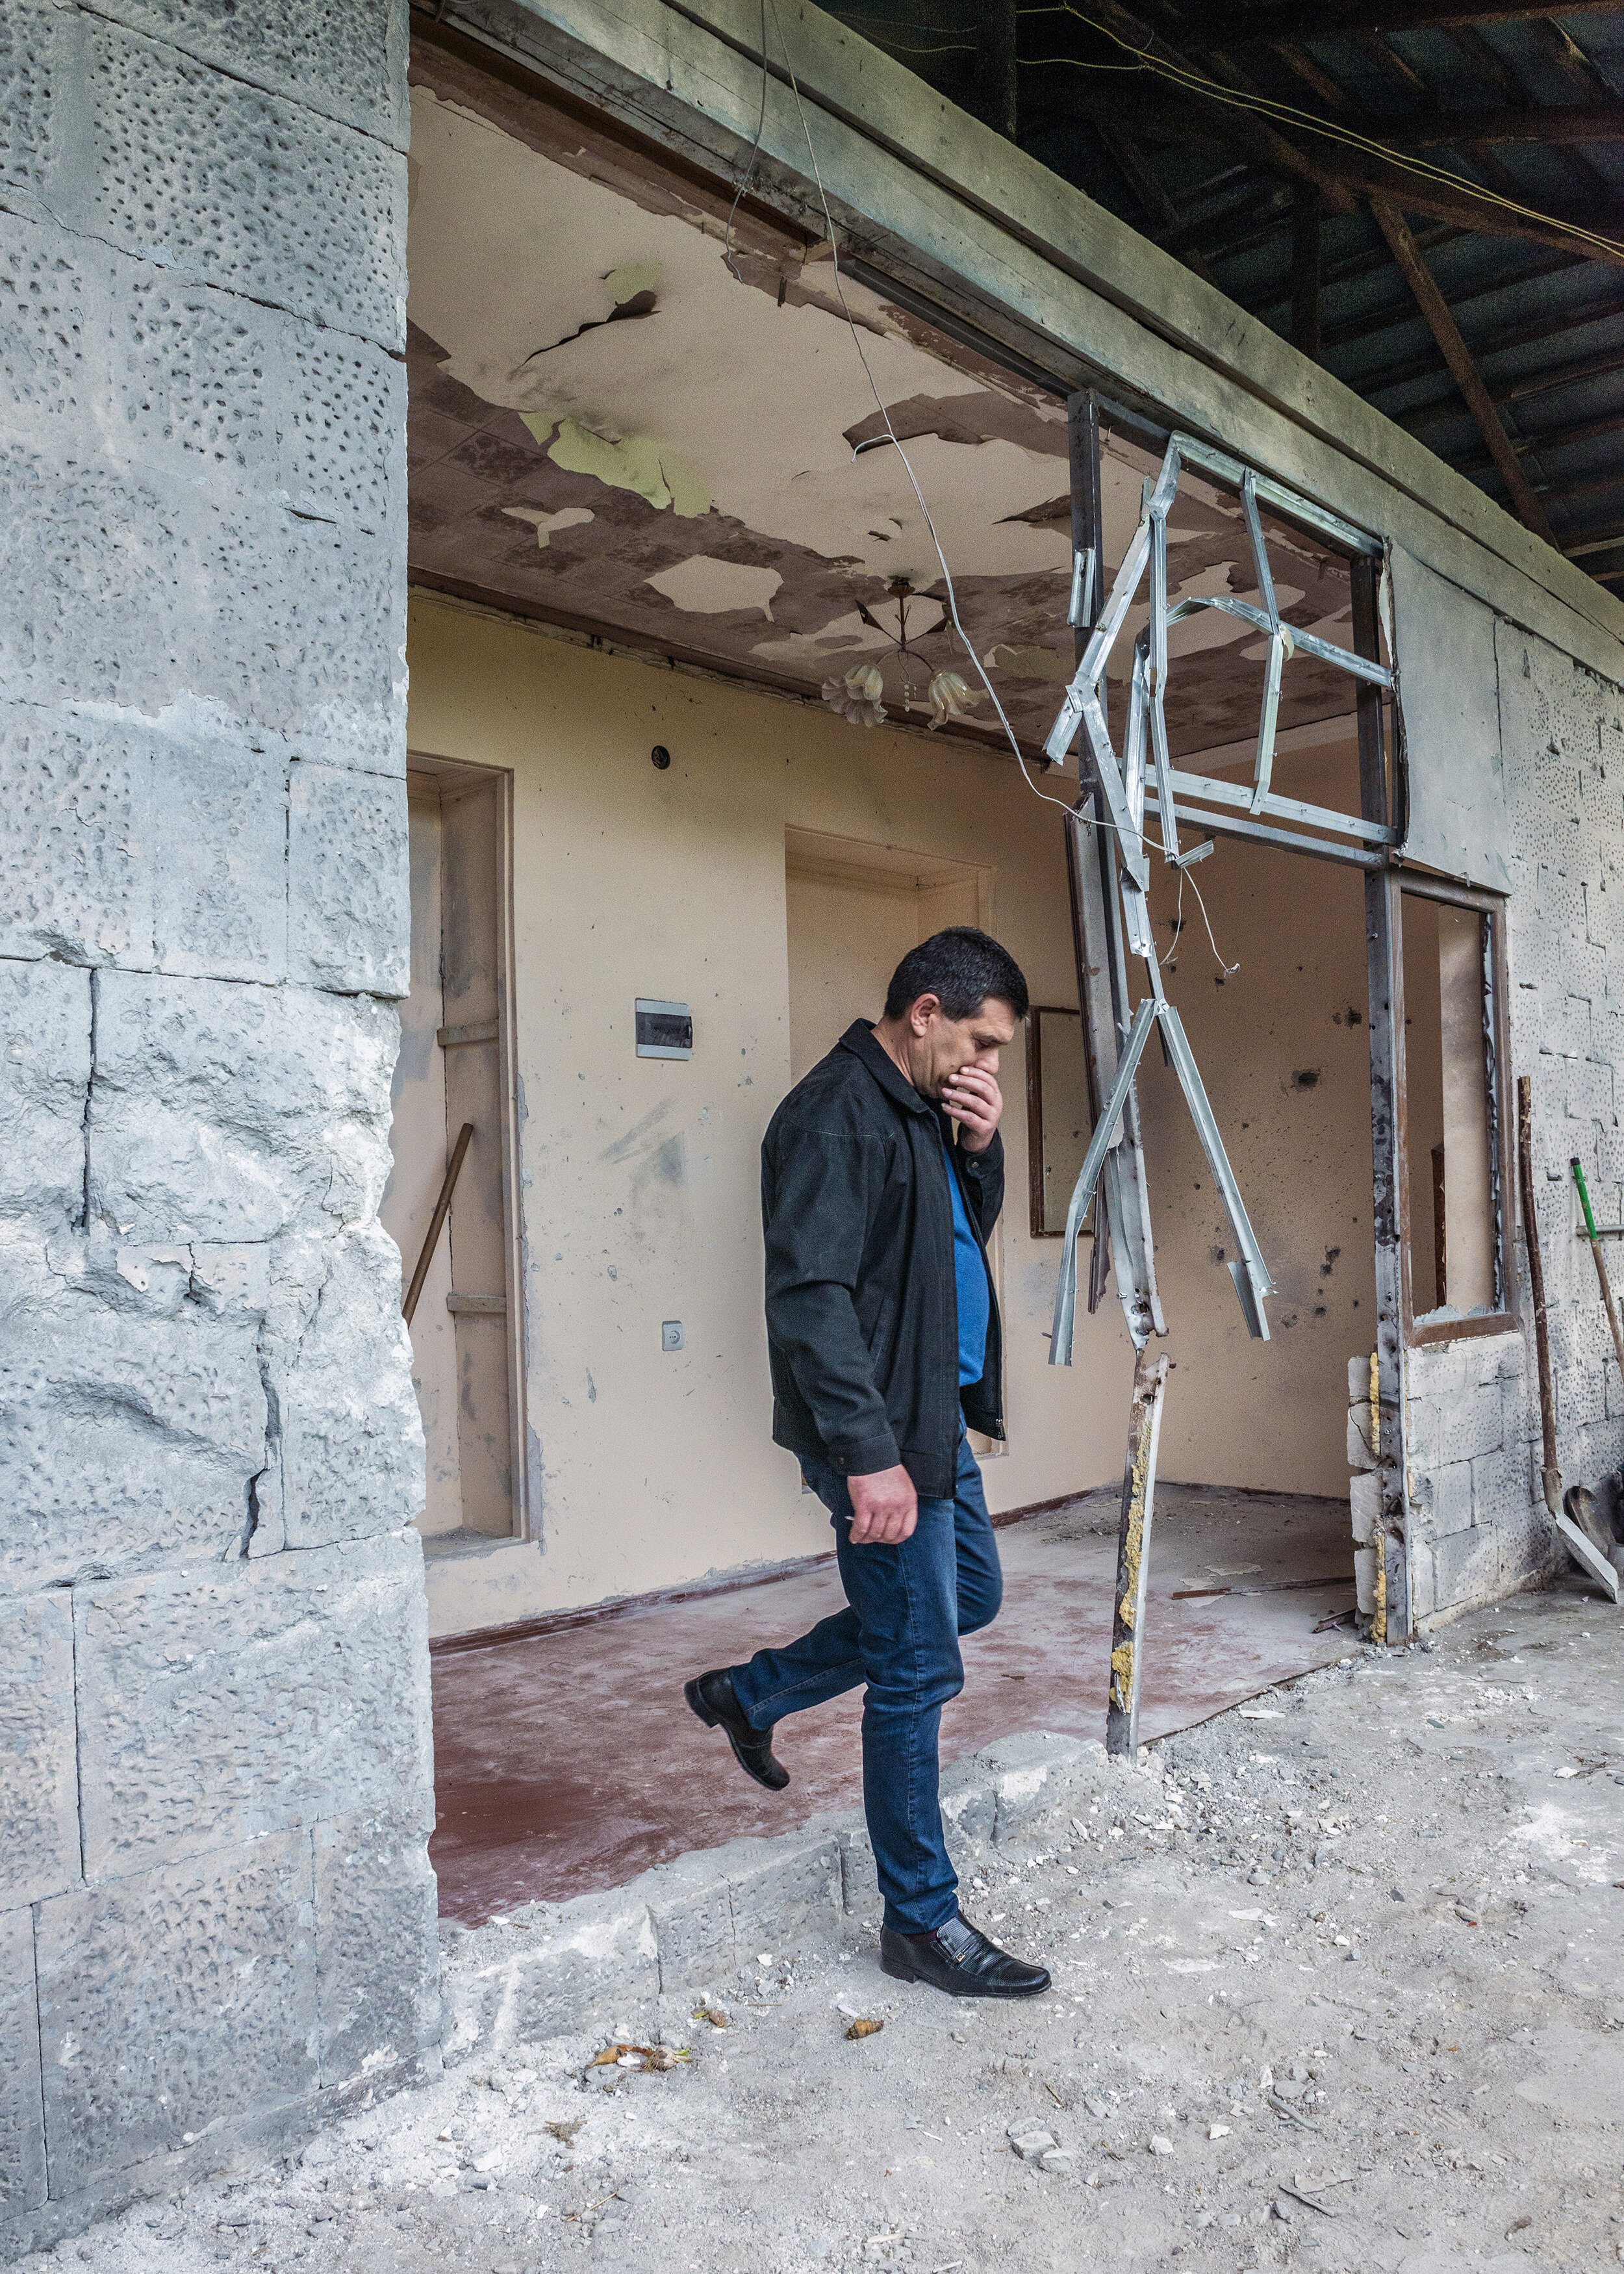  A resident of Martakert, Nagorno-Karabakh steps from his home, which he said was hit by an Azerbaijani artillery shell while he and his wife were at a local restaurant at the start of the Four-Day War.  Martakert, situated less than two miles from t